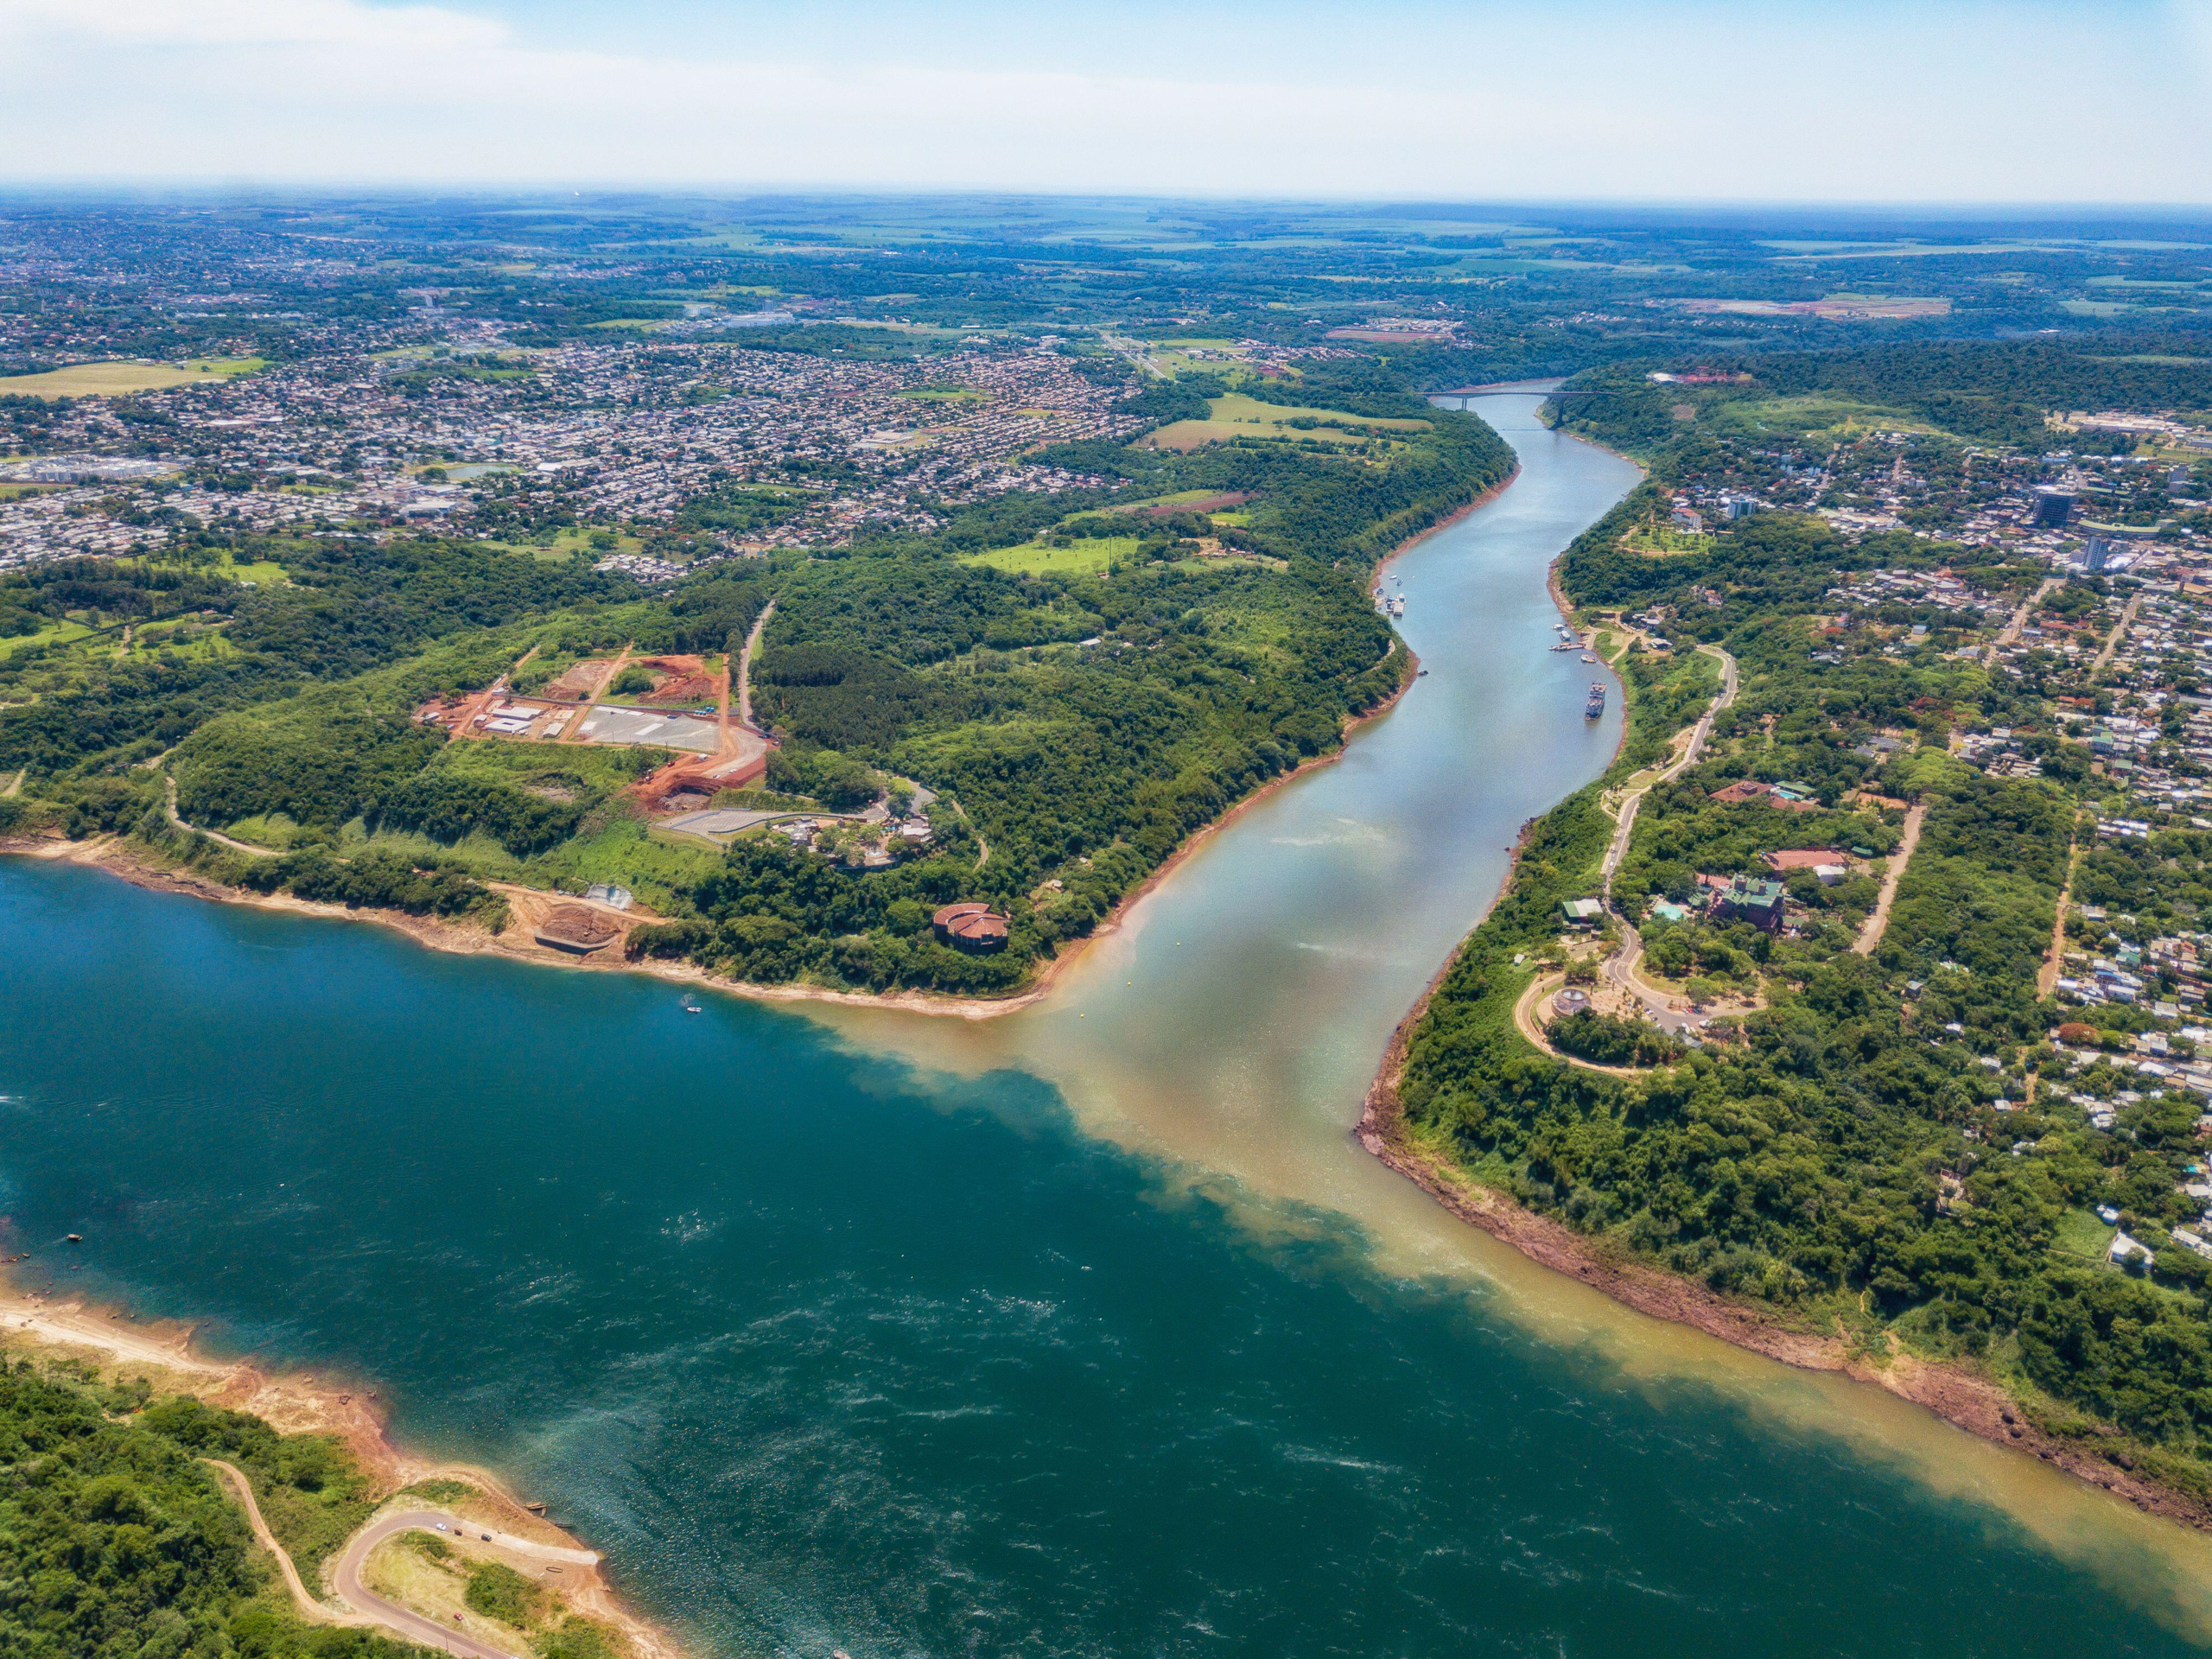 <p>The Paraná River is at the “triple frontier” between the cities of Presidente Franco in Paraguay, Foz do Iguaçu in Brazil, and Puerto Iguazú in Argentina. The river forms part of a waterway that is an important route for international trade. (Image: Jan Schneckenhaus / Alamy)</p>